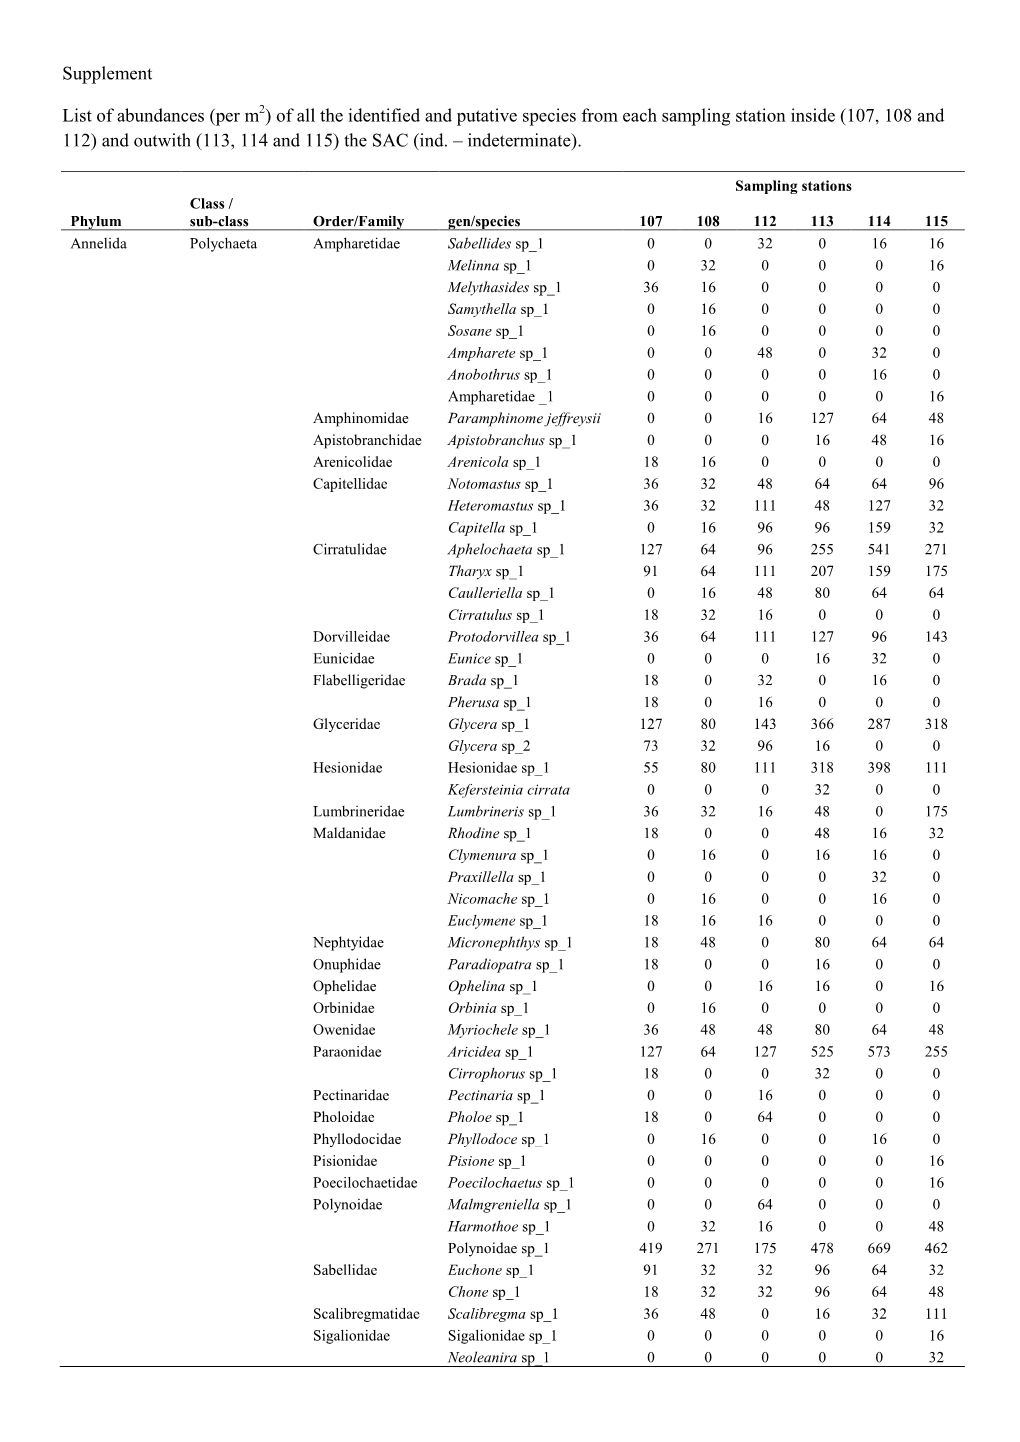 Supplement List of Abundances (Per M2) of All the Identified and Putative